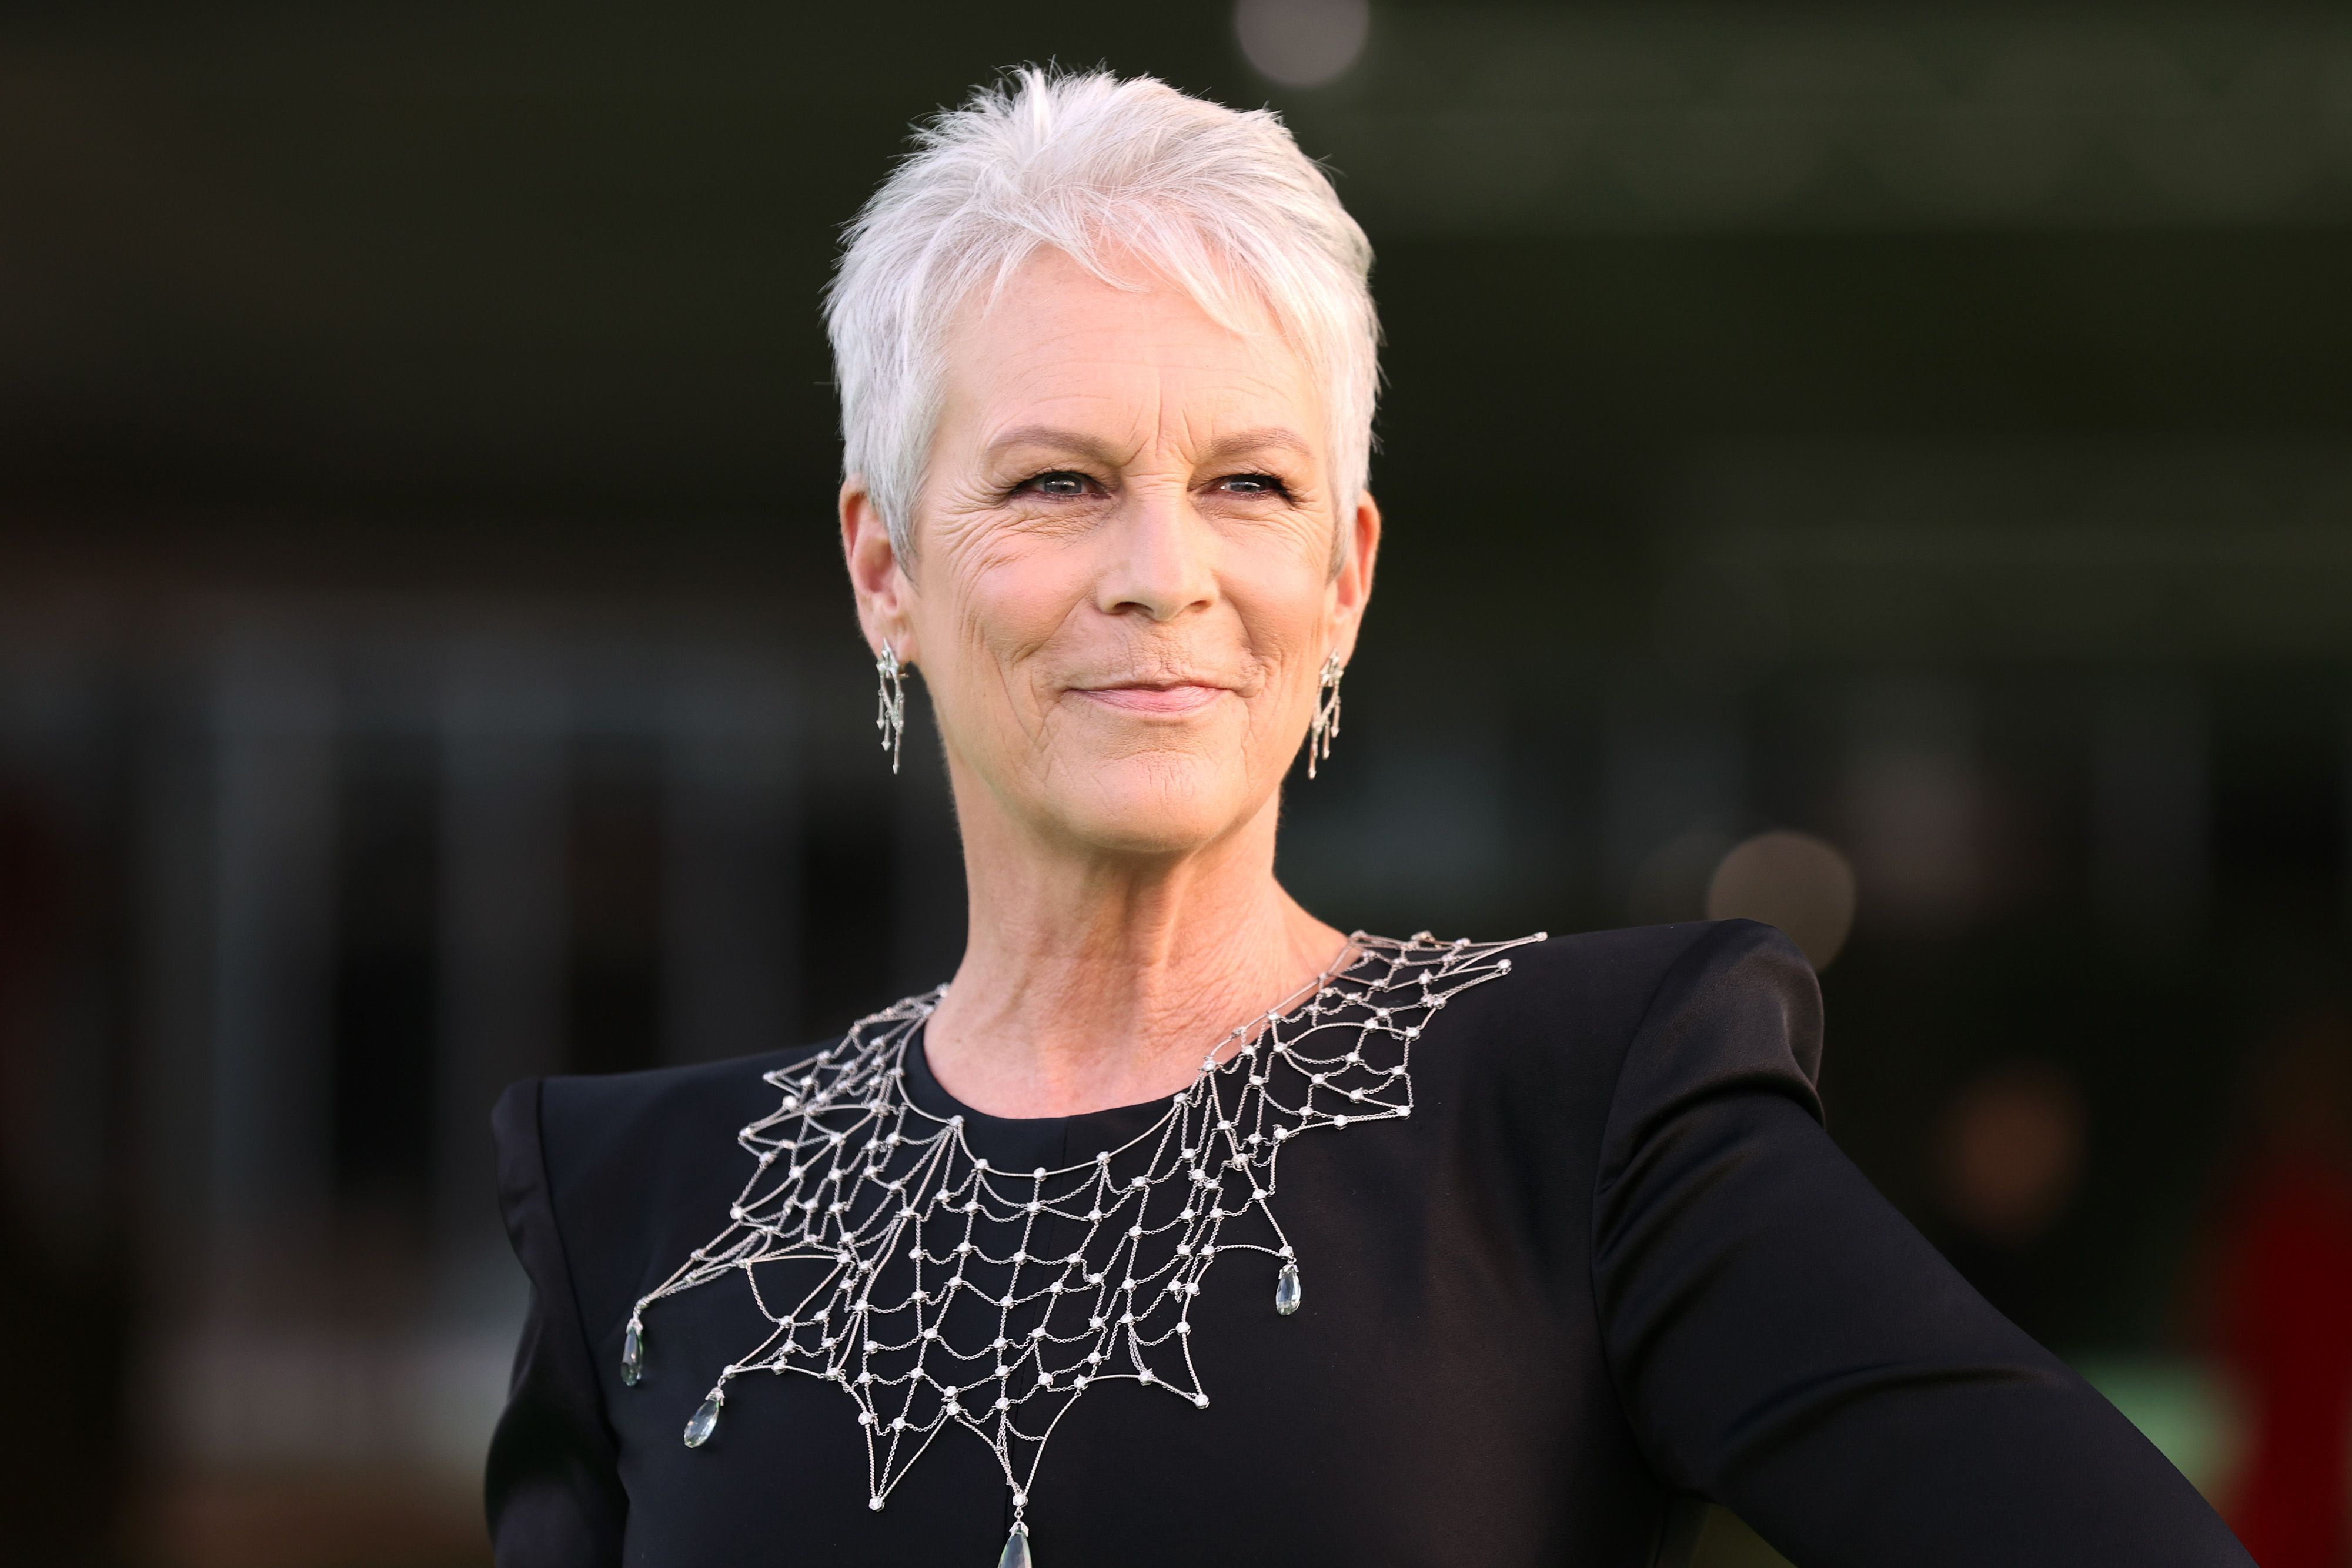 Jamie Lee Curtis at The Academy Museum of Motion Pictures Opening Gala at The Academy Museum of Motion Pictures on September 25, 2021 in Los Angeles, California. | Source: Getty Images